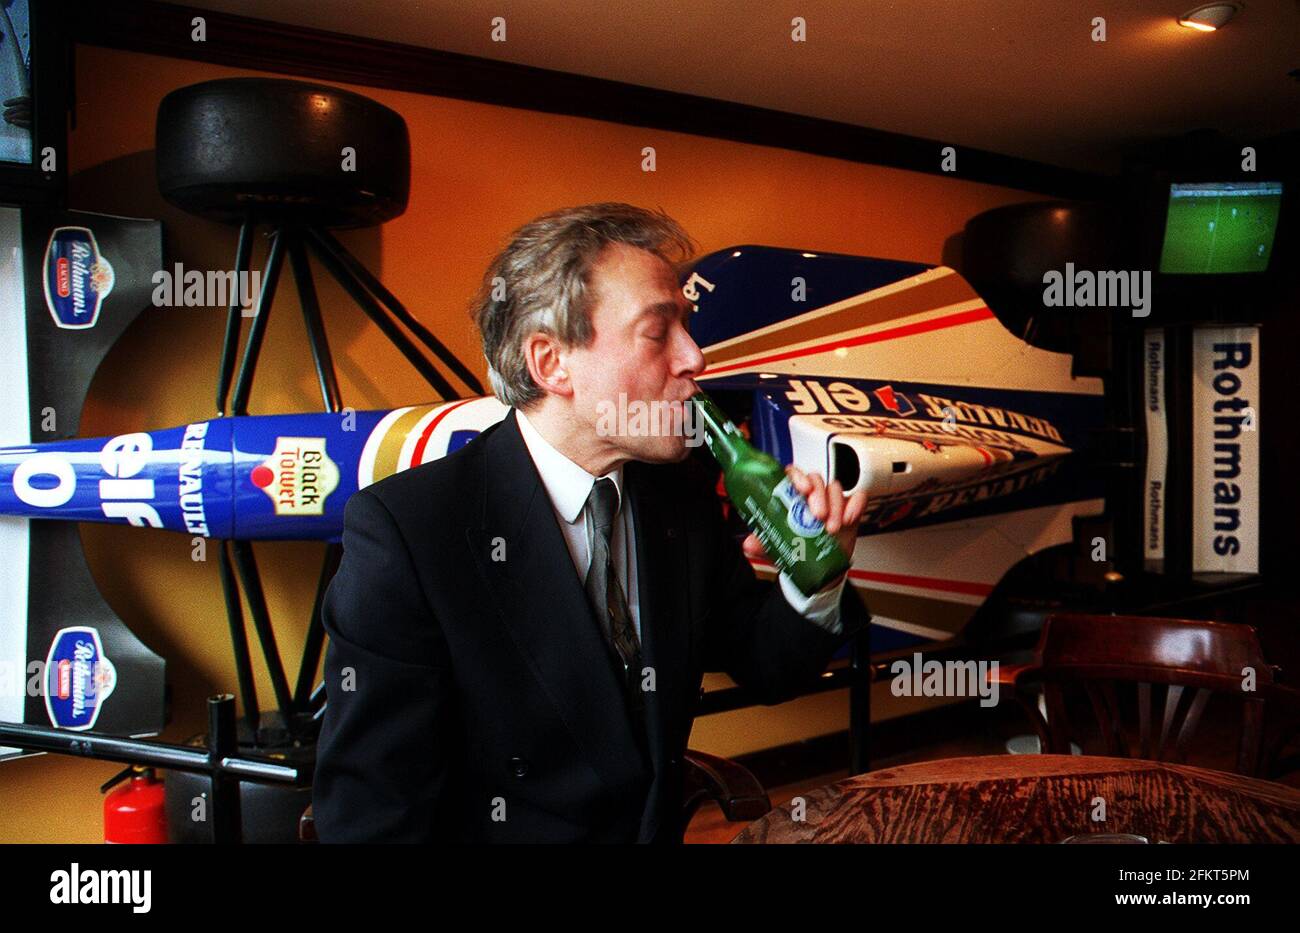 Tony Banks Sports Minister MP Labour for Newham North East drinks a bottle of Rolling Rock Beer at the Sports Cafe in London before going to his new office at the Department of National Heritage Stock Photo